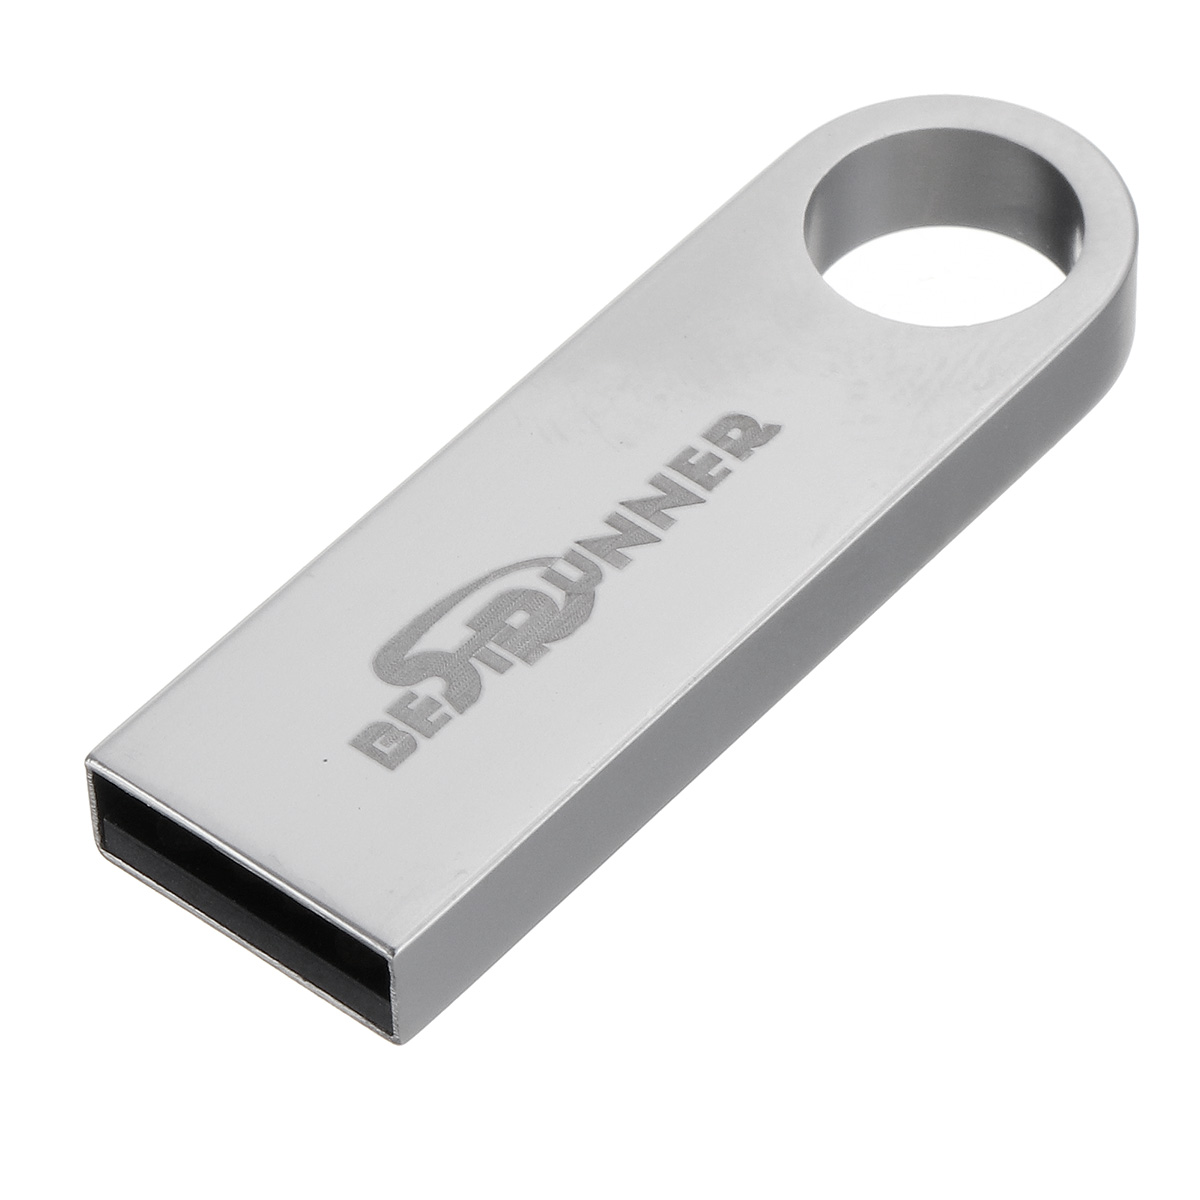 Find 32/64GB USB 2 0 Flash Drive Metal Flash Memory Card USB Stick Pen Drive U Disk for Sale on Gipsybee.com with cryptocurrencies